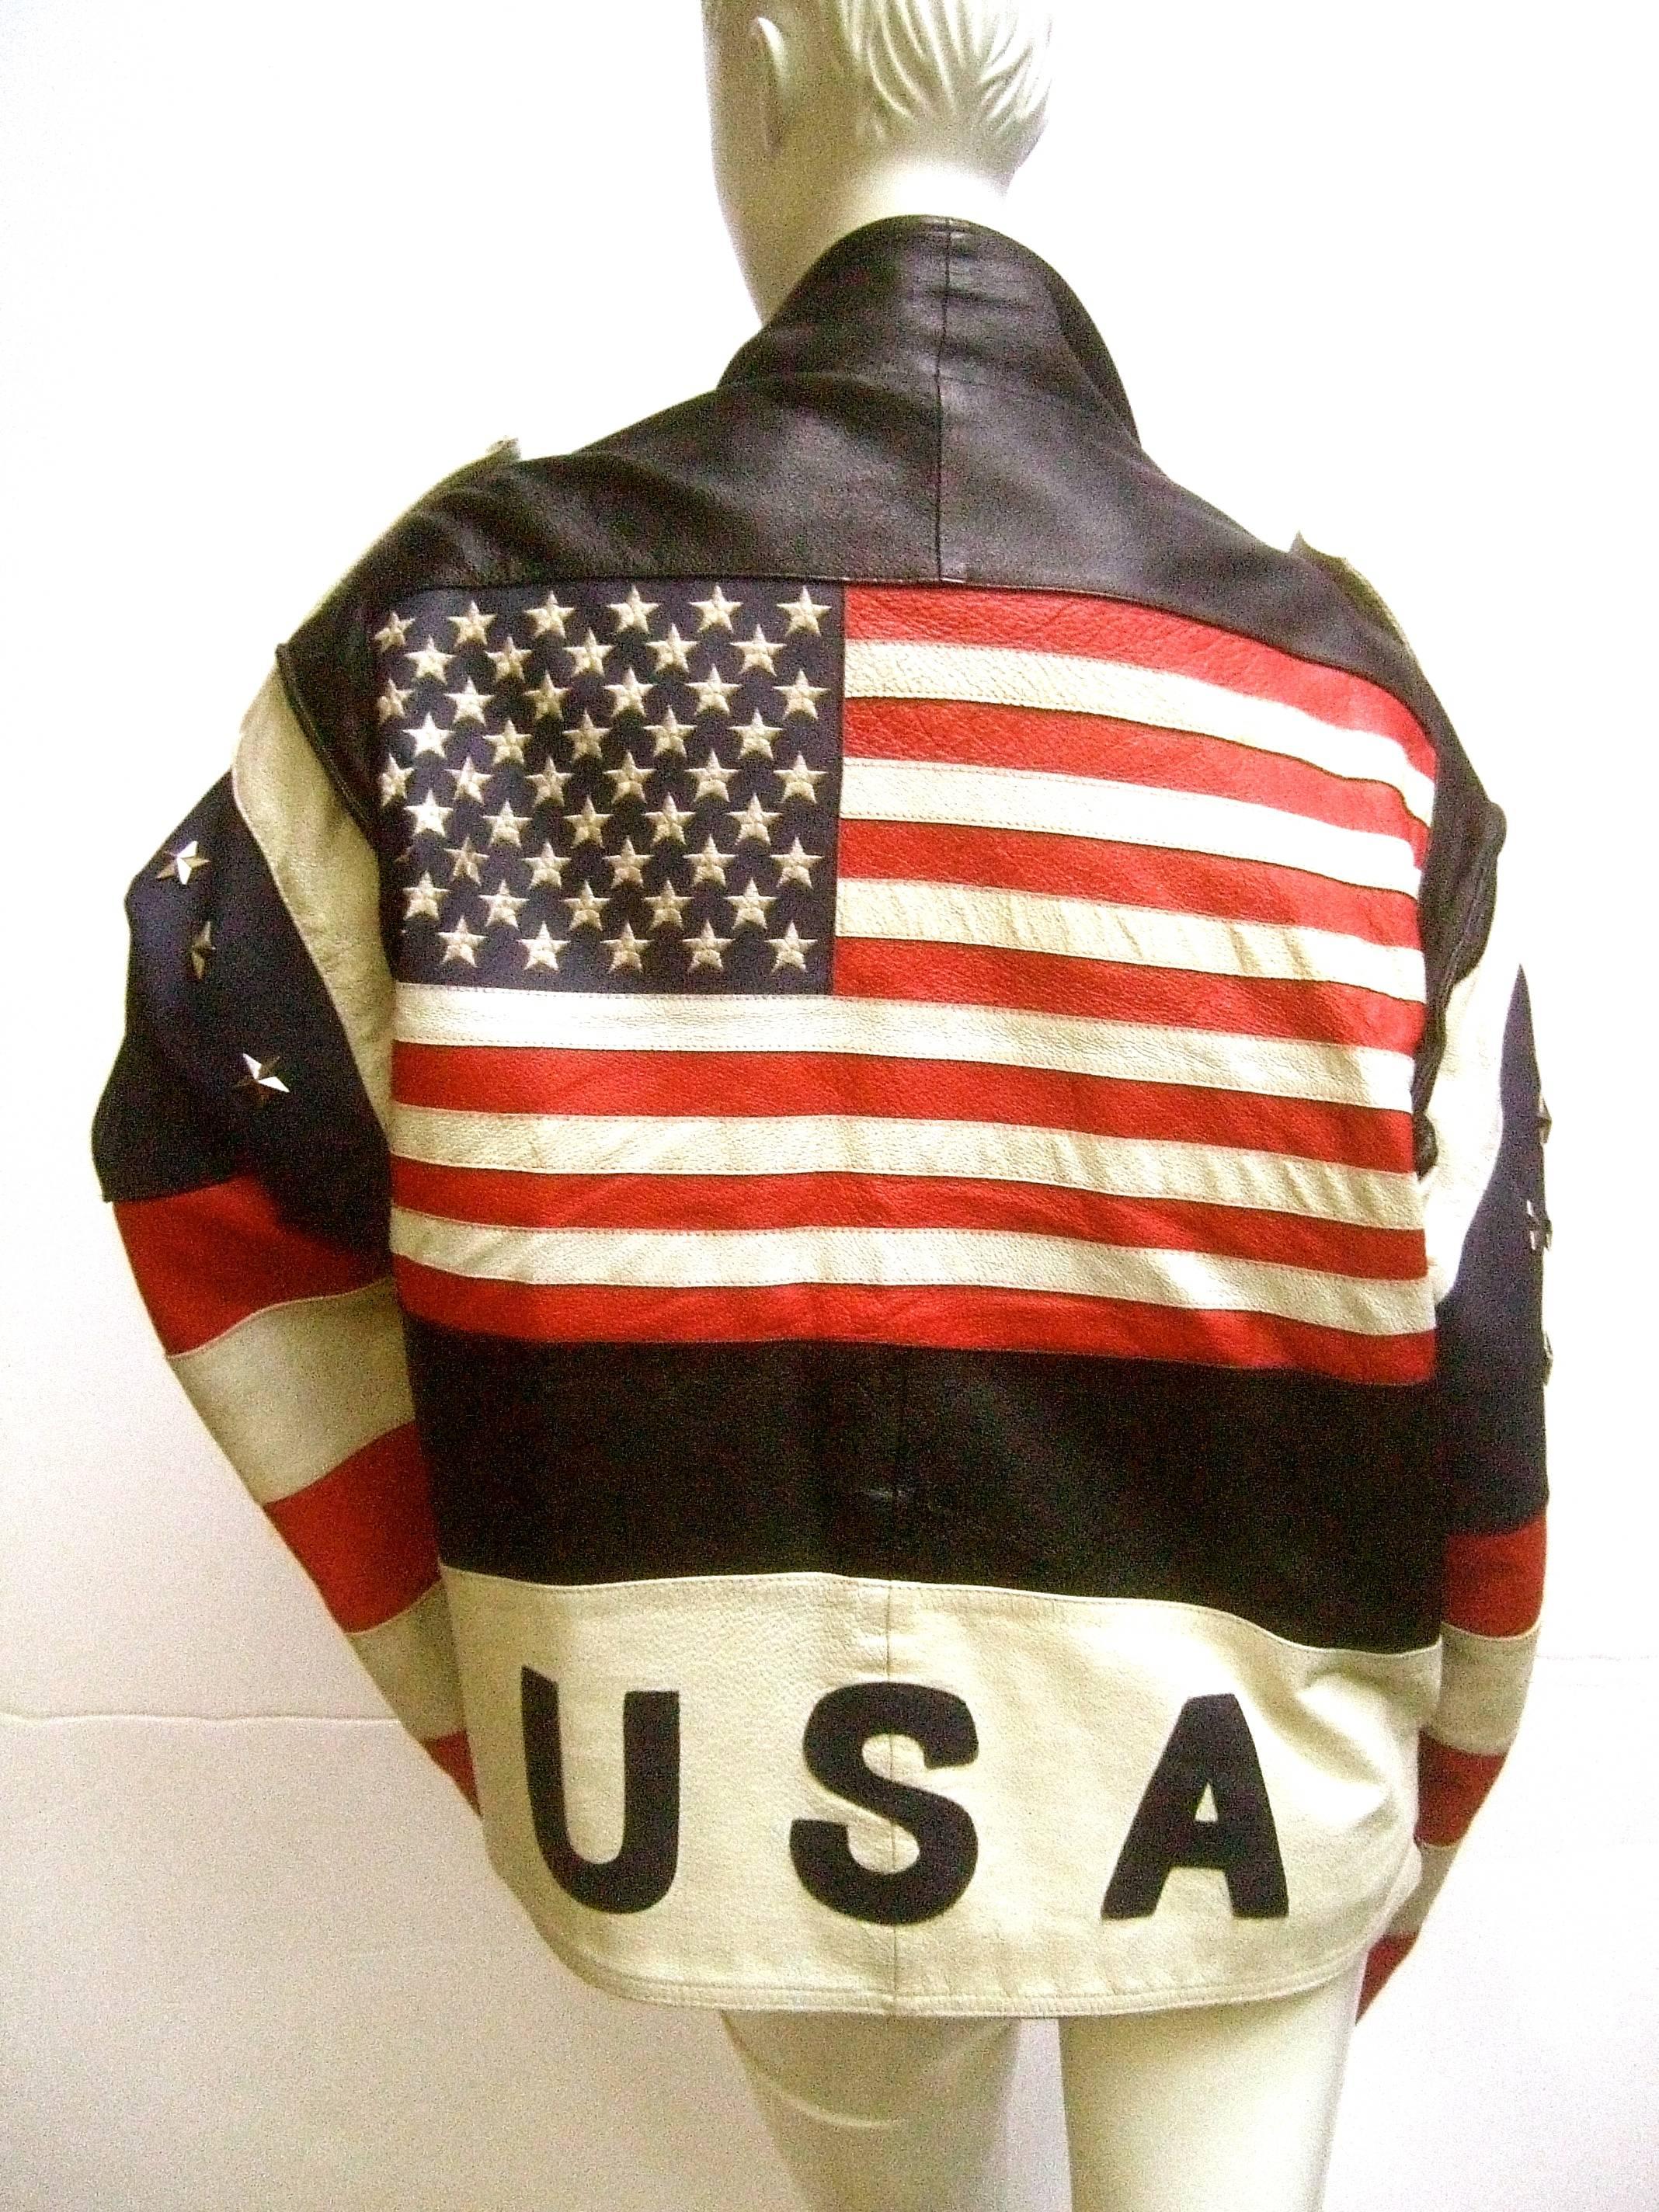 Men's Leather patriotic american flag motorcycle jacket ca 1980s
The unique leather jacket is deigned with the American flag
across the back side. Underneath the flag in bold block
letters reads USA. The patriotic theme is evident throughout
the